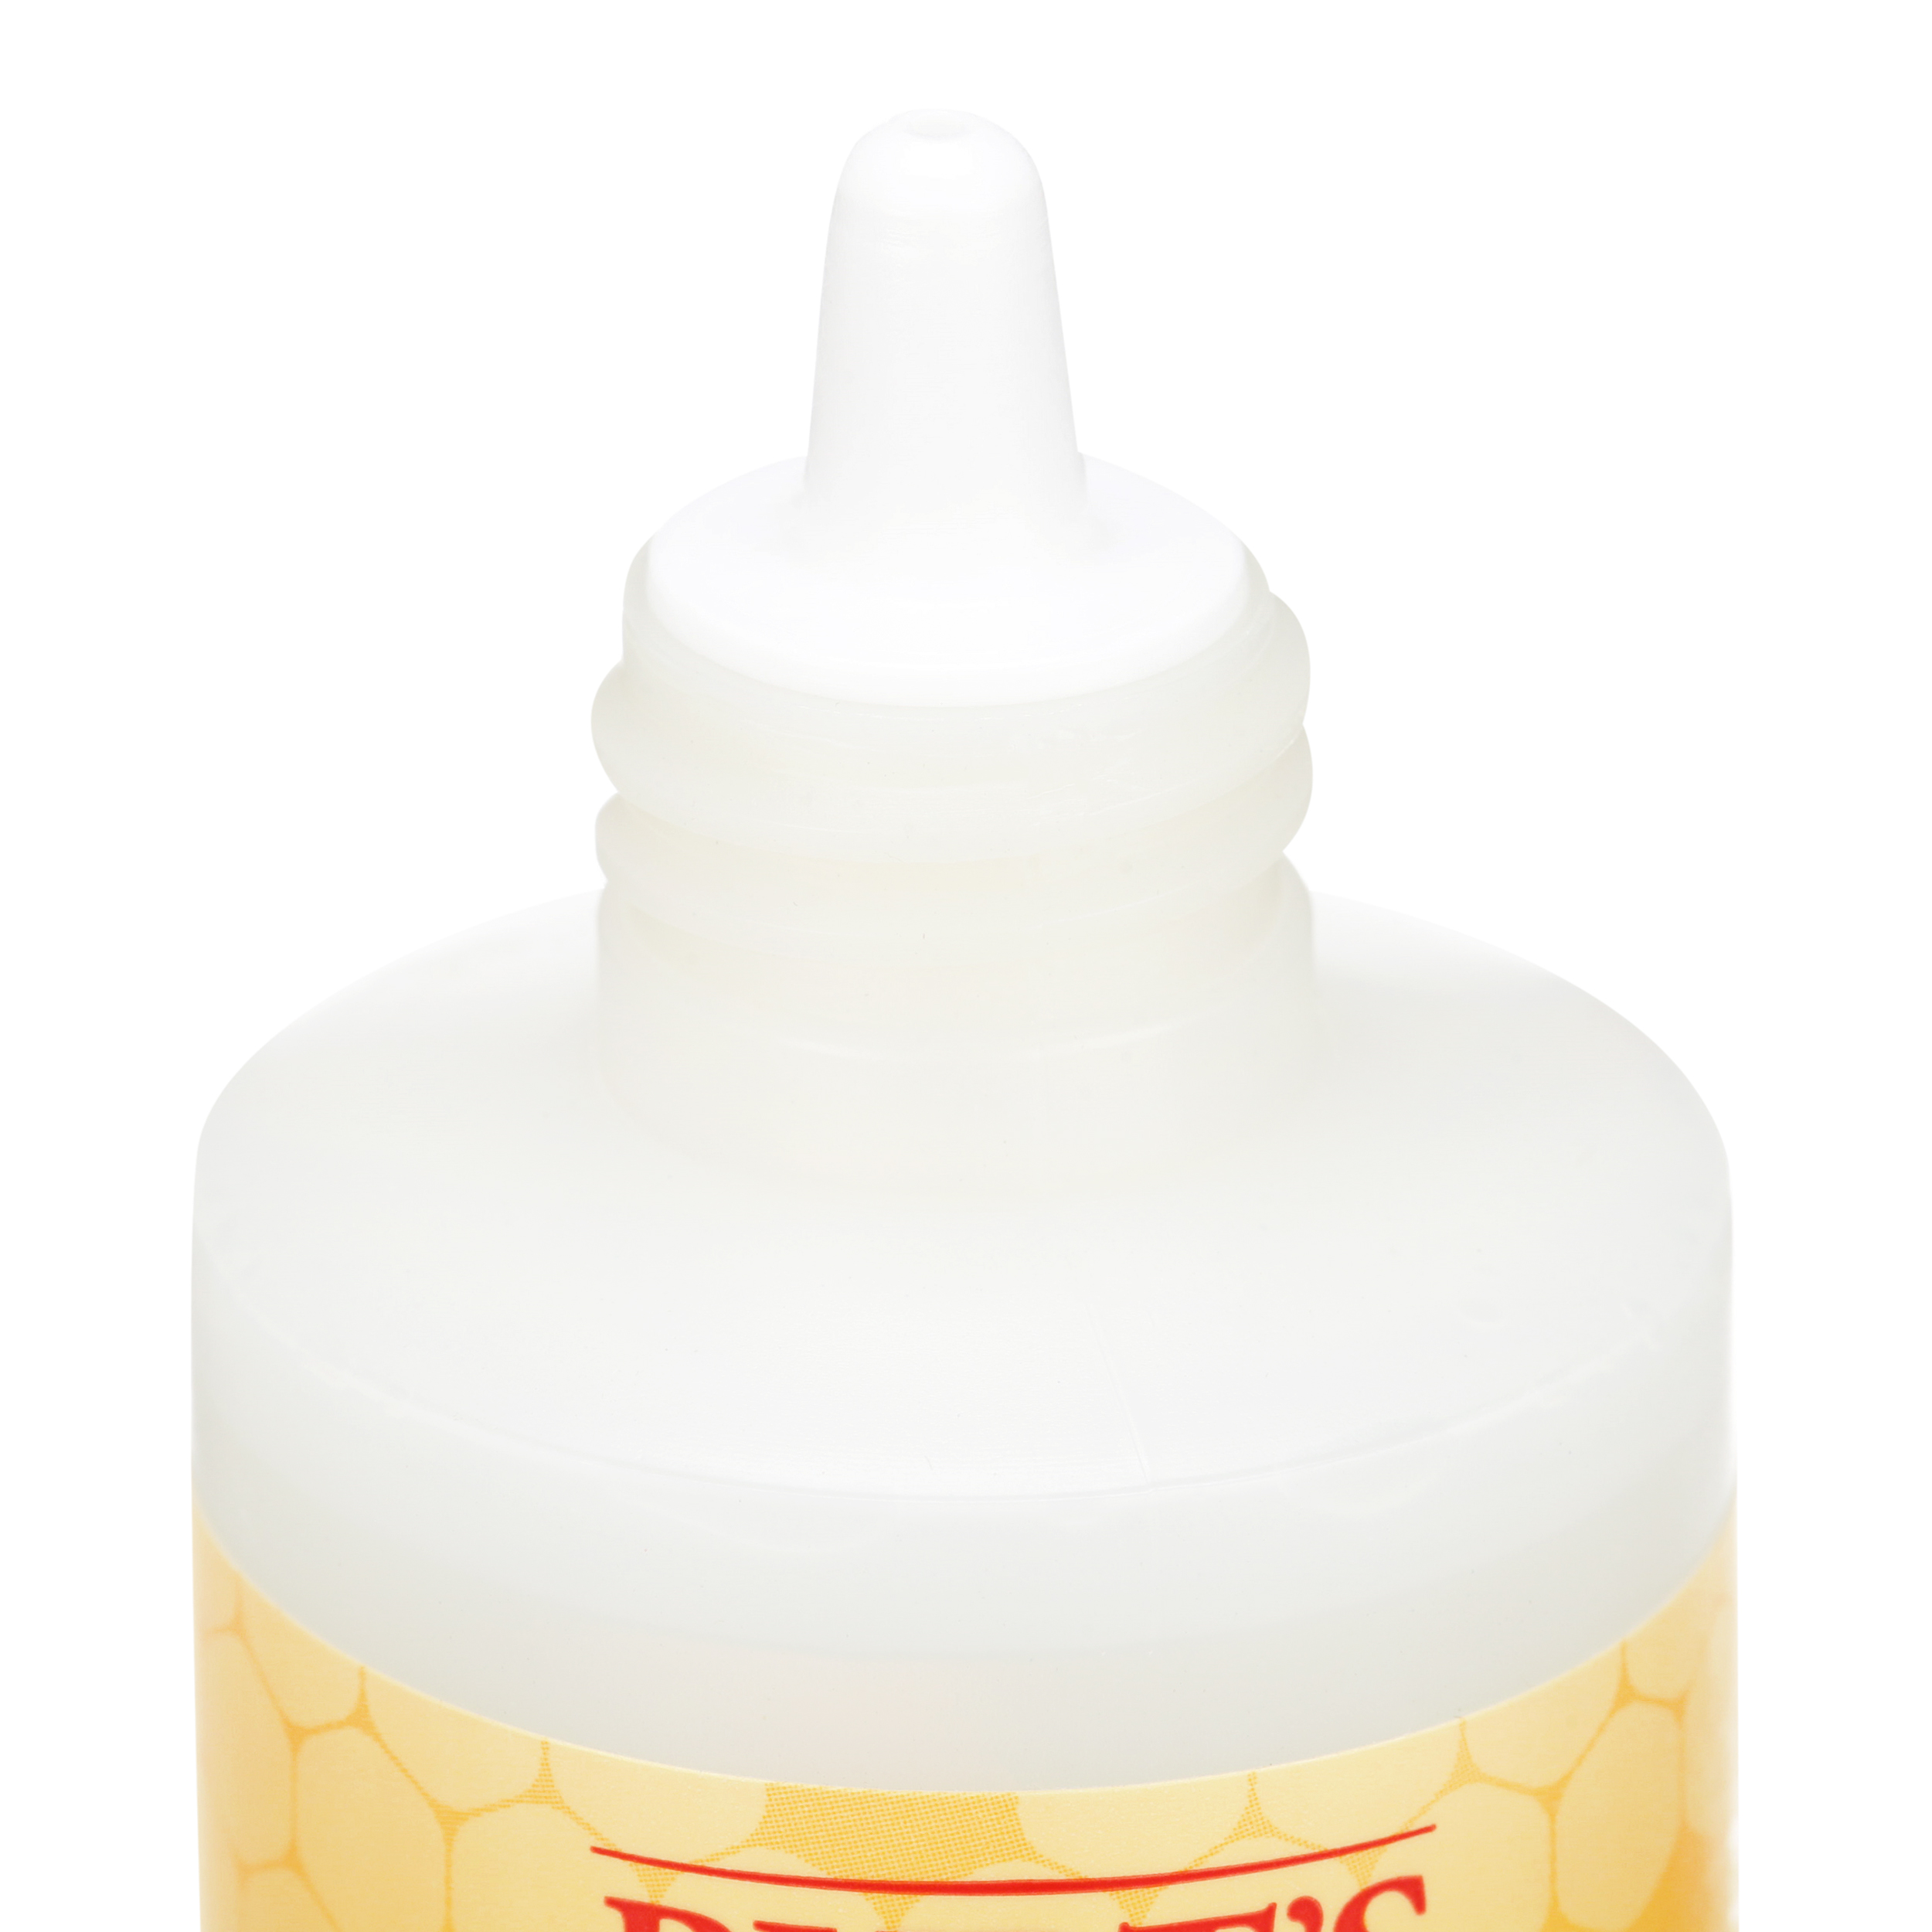 Burt's Bees Peppermint Ear Cleaner for Dogs, 4 Ounces - image 5 of 8